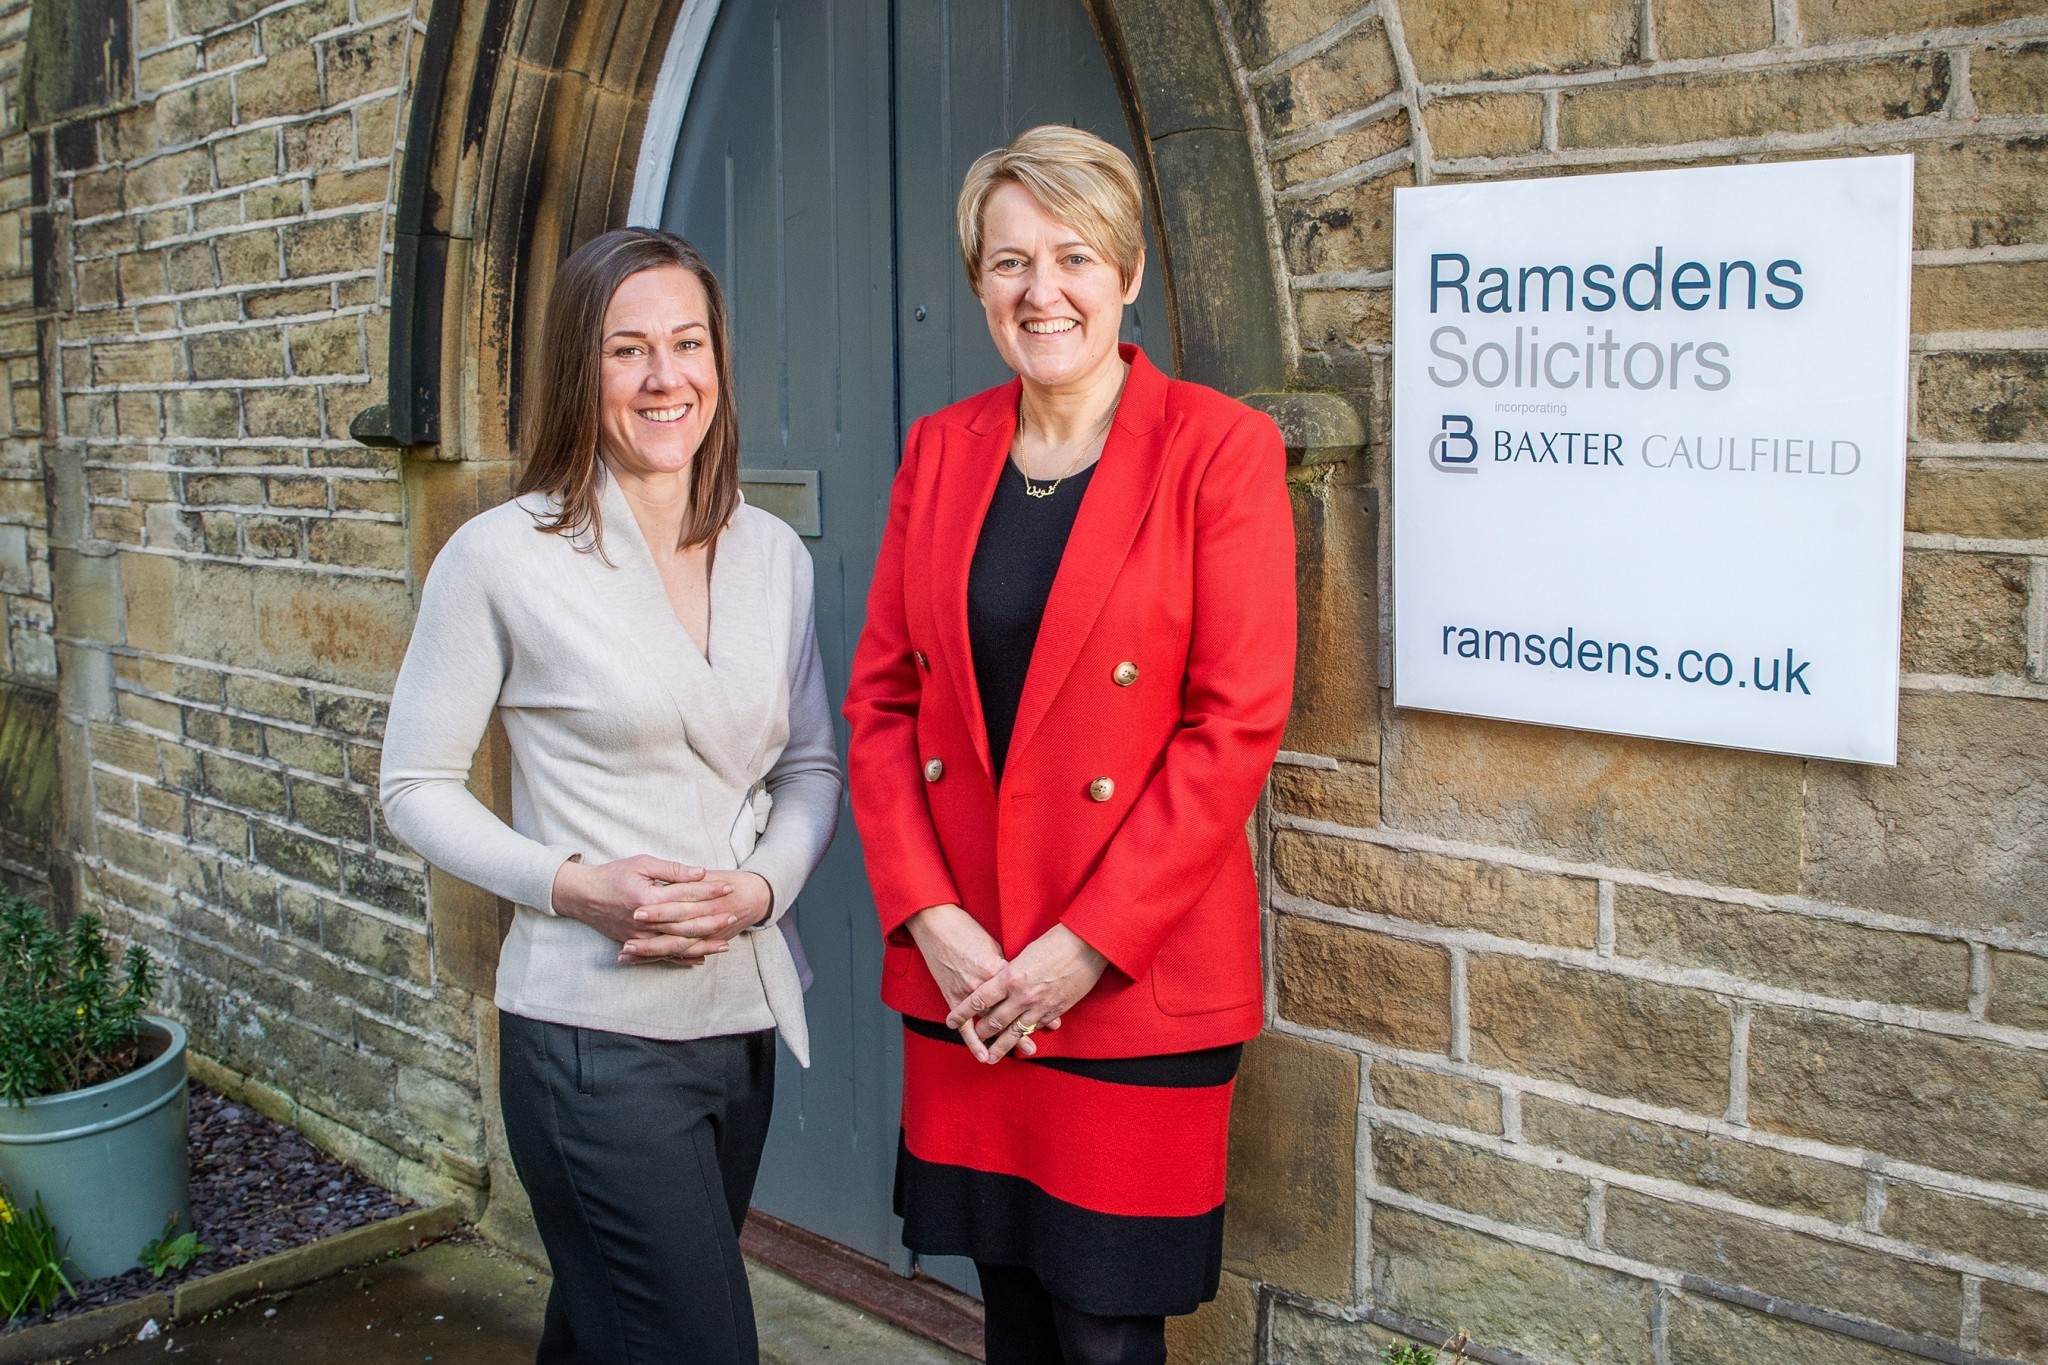 Ramsdens Solicitors appoints new Commercial Property Partner